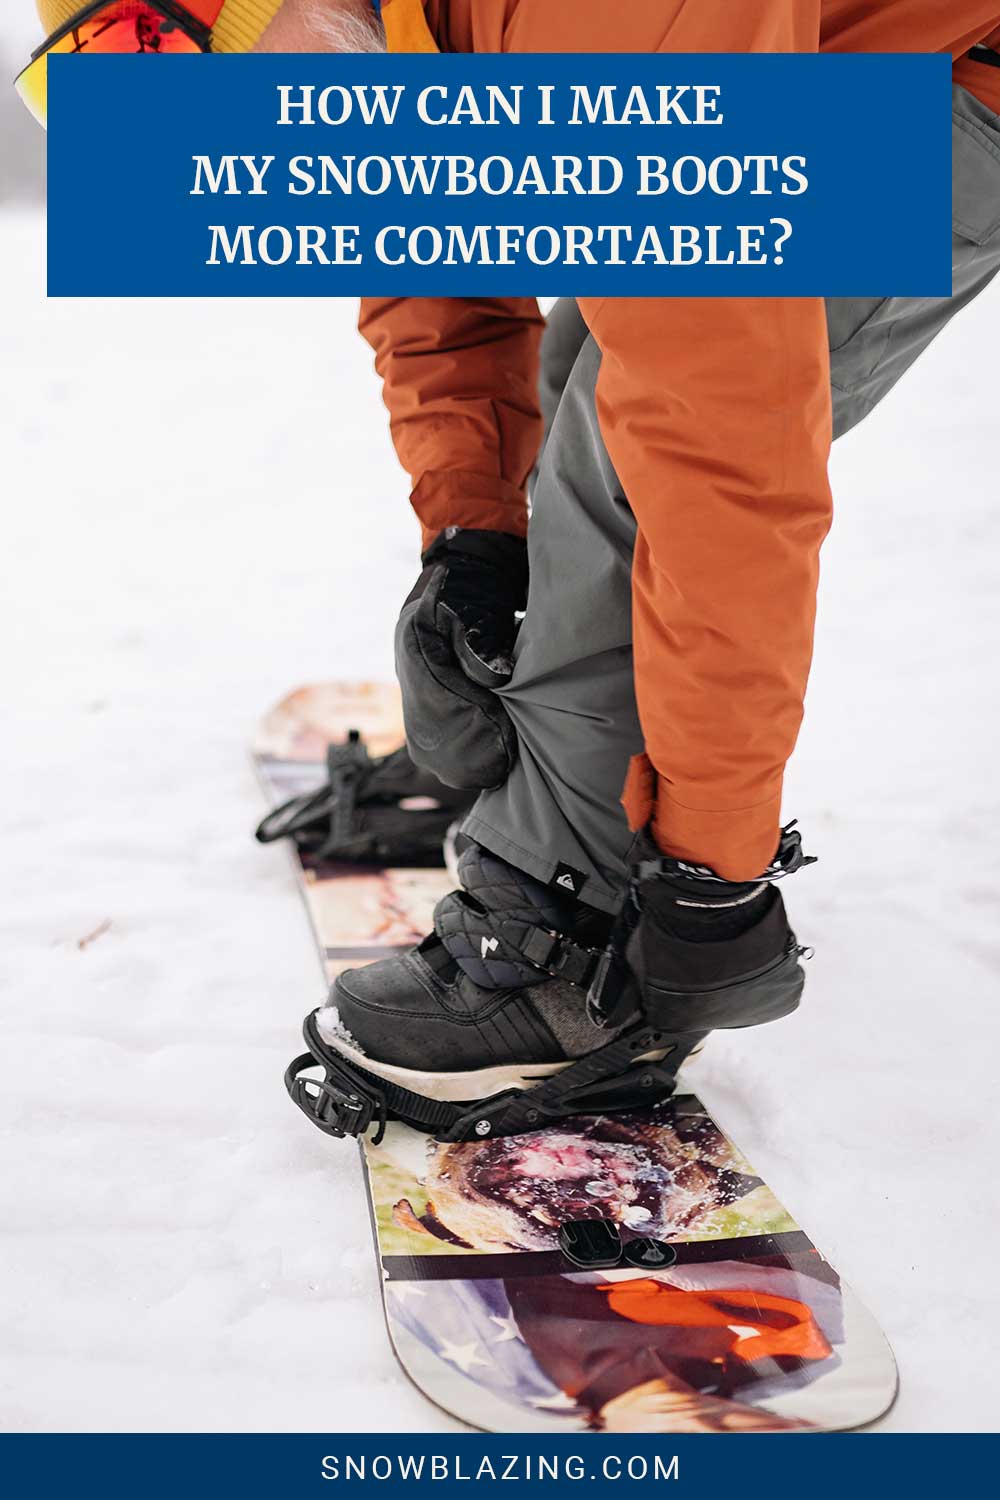 Person adjusting snowboard boots standing on a snowboard - How Can I Make My Snowboard Boots More Comfortable?